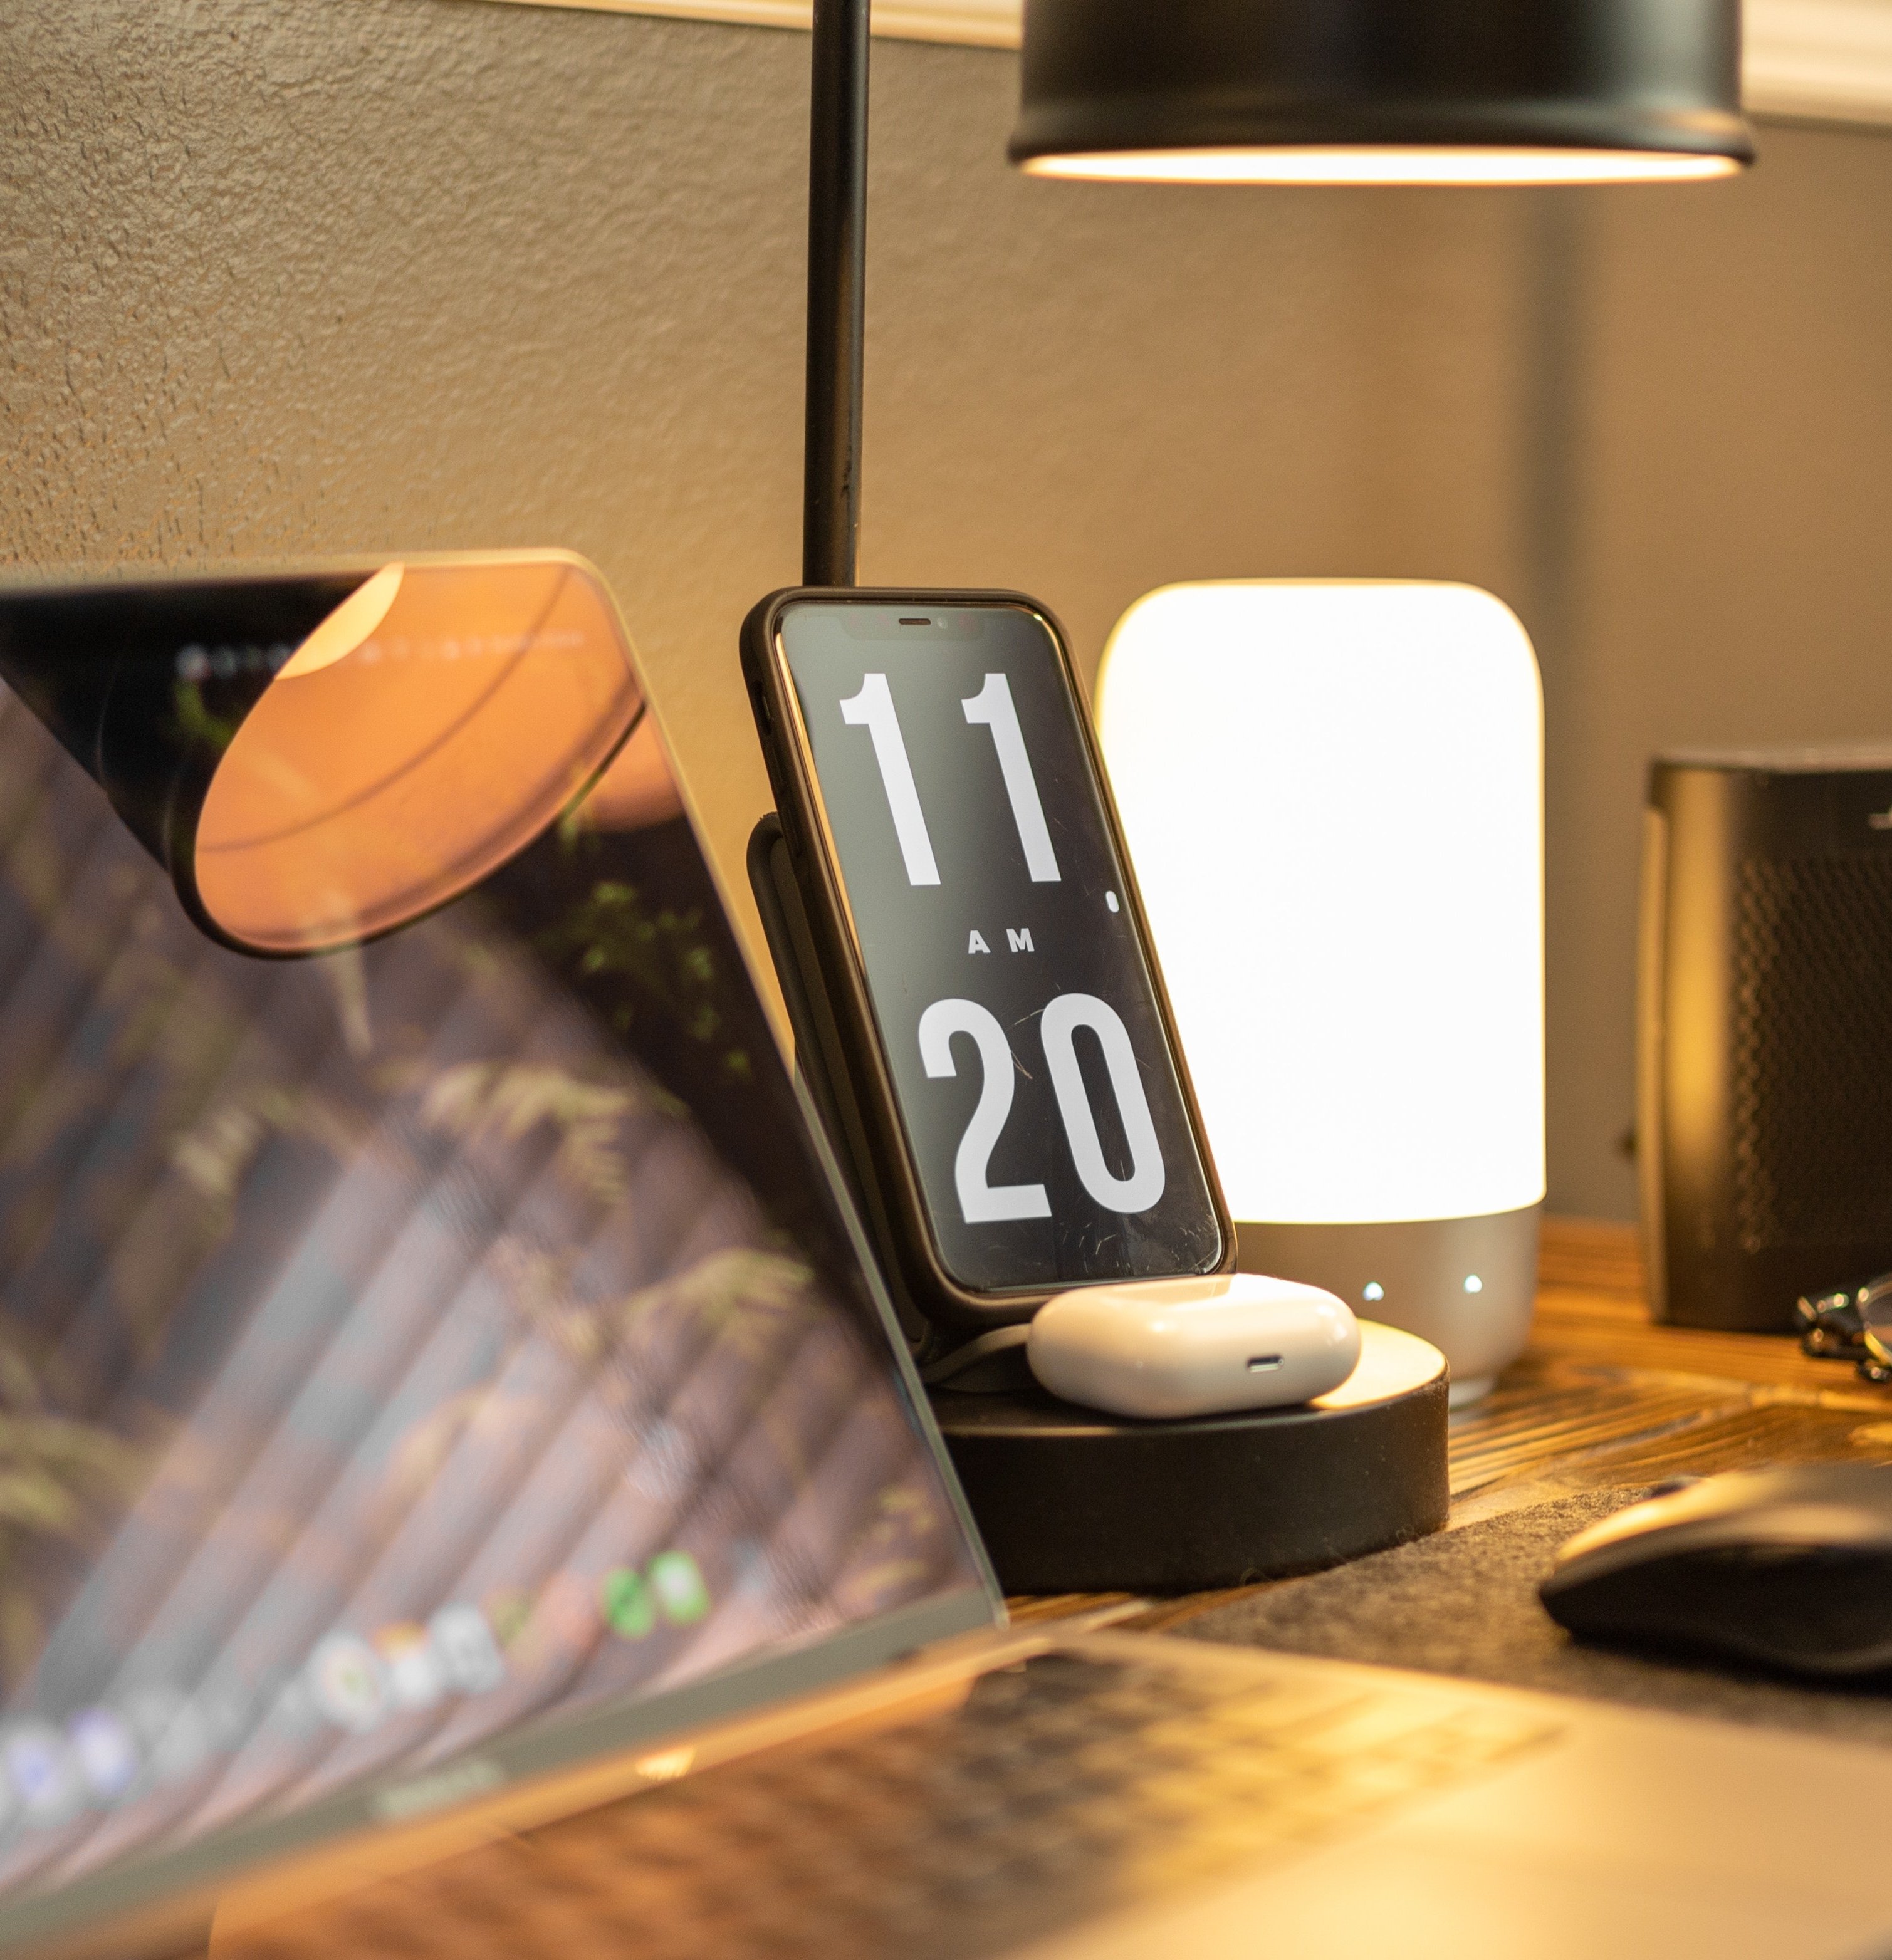 traditional desk lamp provides yellowish light with glares on the screen